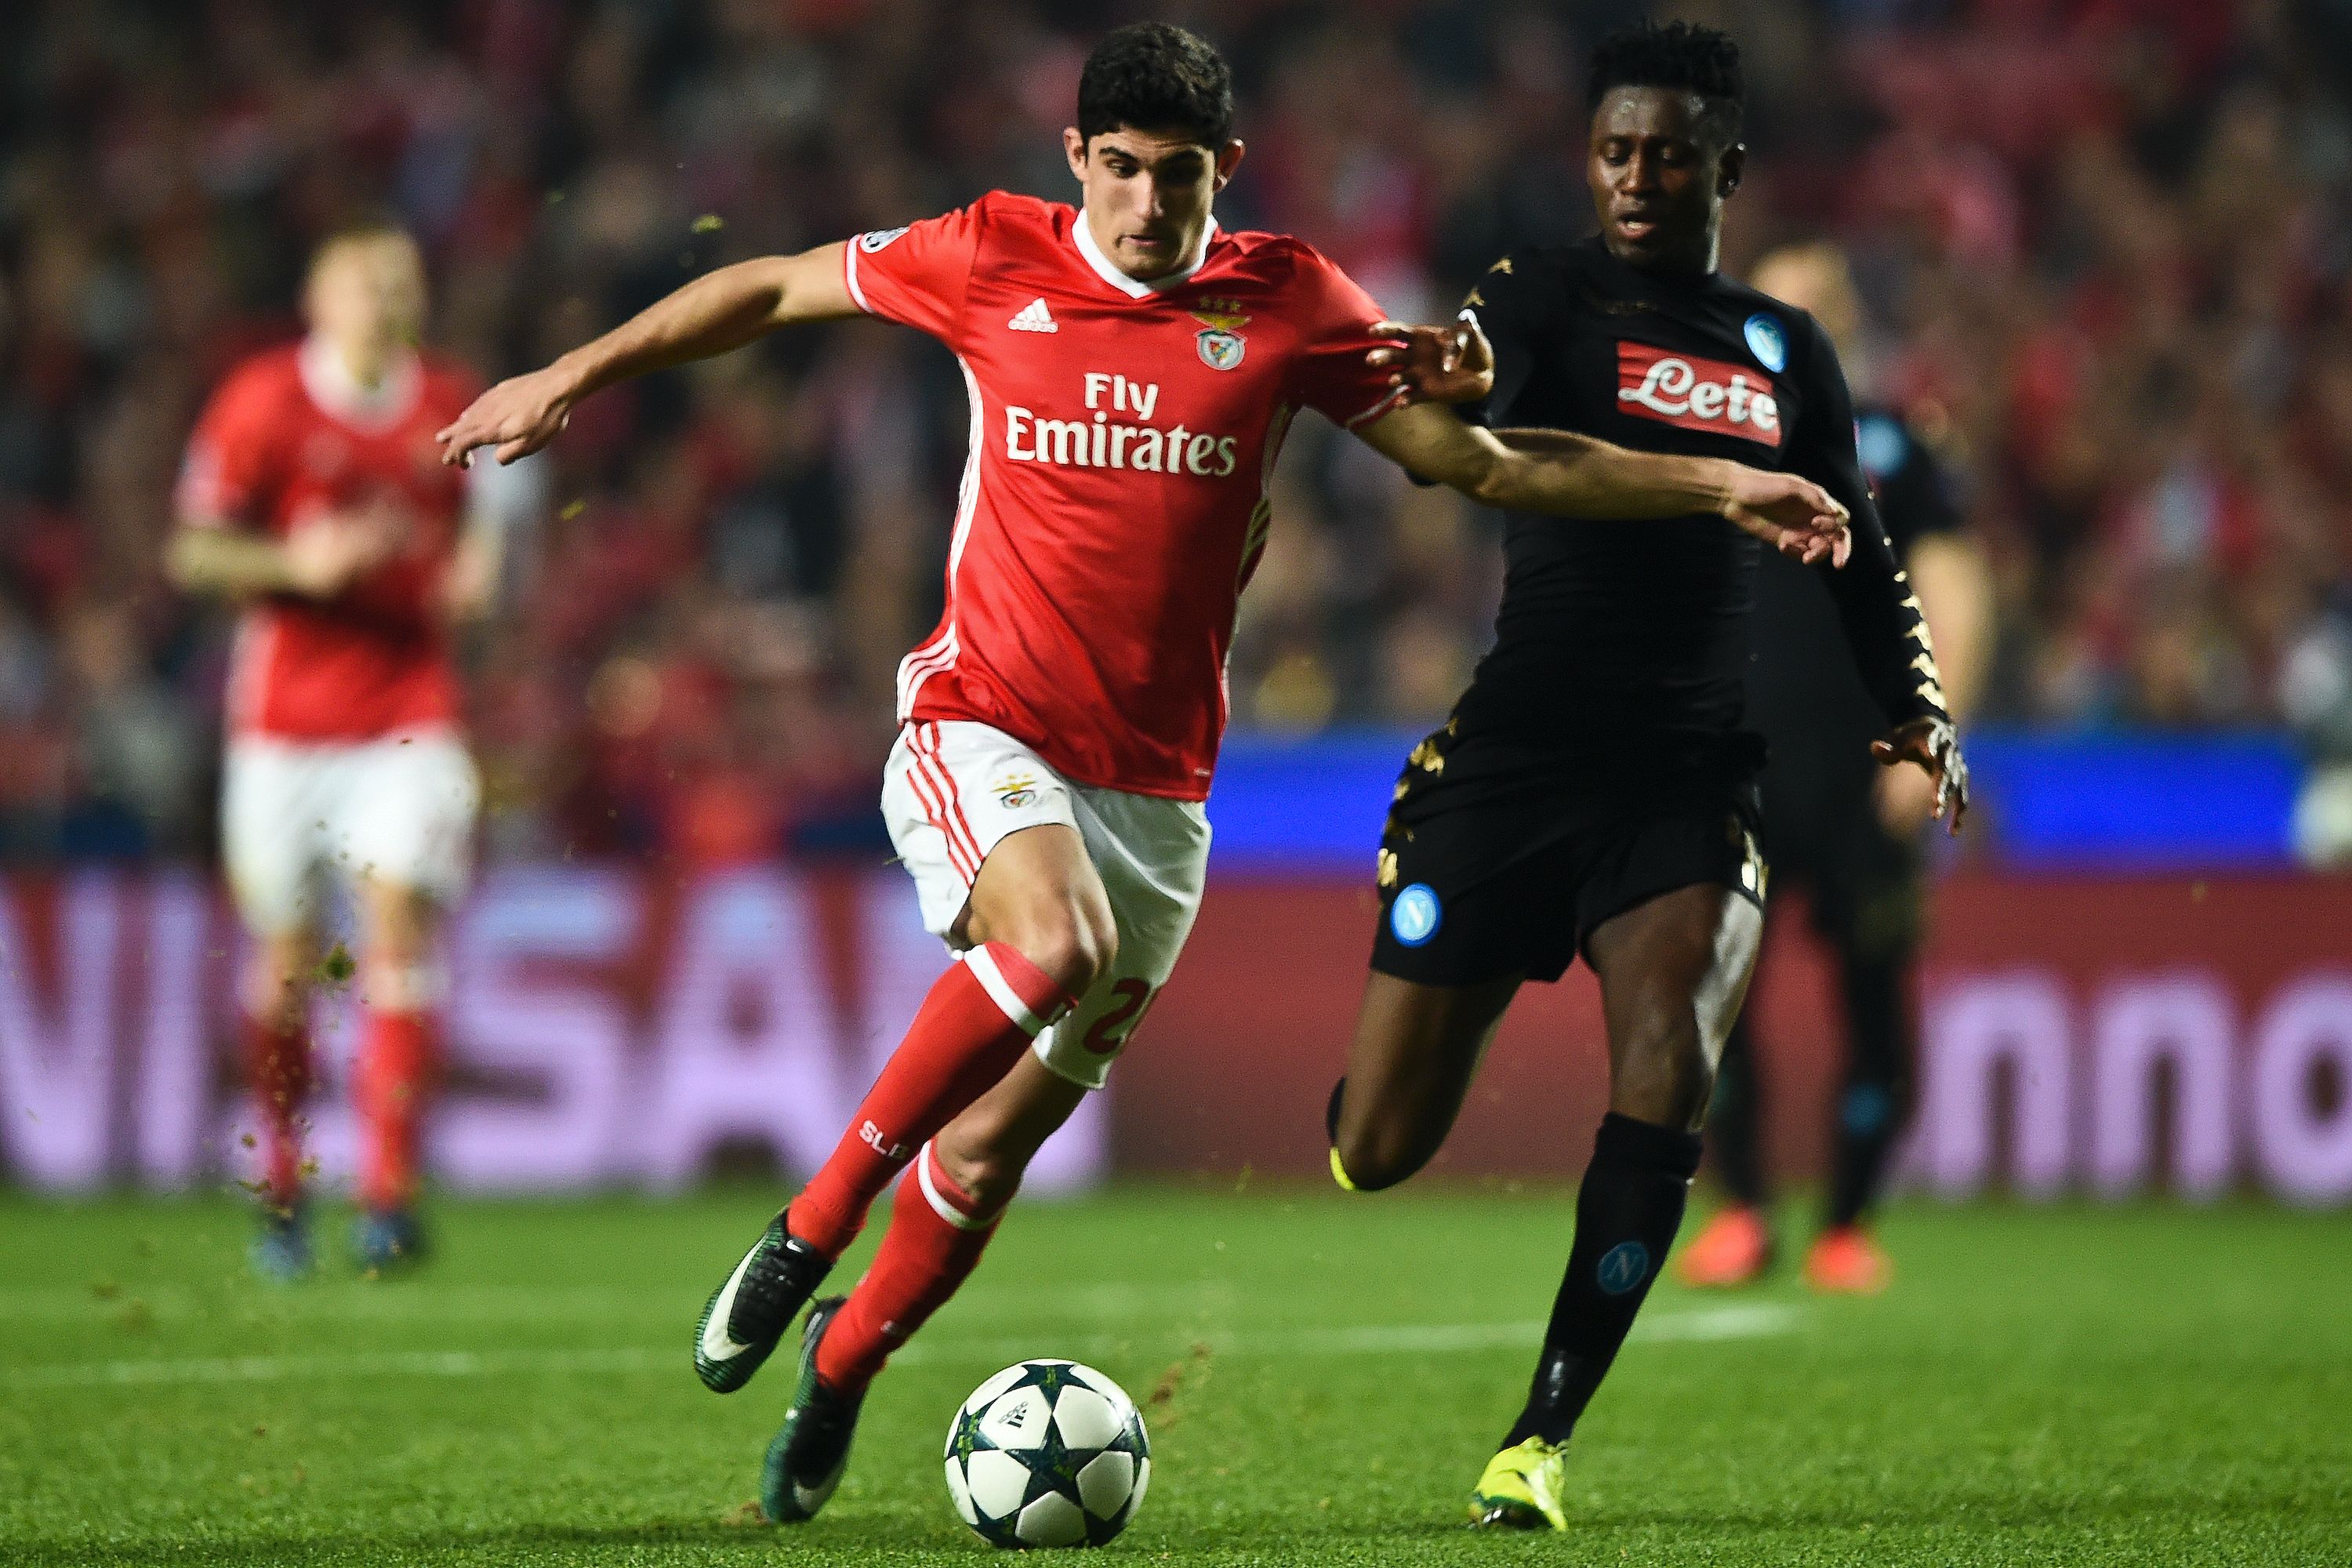 Benfica's forward Goncalo Guedes (L) vies with Napoli's Guinean midfielder Amadou Diawara during the UEFA Champions League Group B football match SL Benfica vs SSC Napoli at the Luz stadium in Lisbon, on December 6, 2016. / AFP / PATRICIA DE MELO MOREIRA        (Photo credit should read PATRICIA DE MELO MOREIRA/AFP/Getty Images)